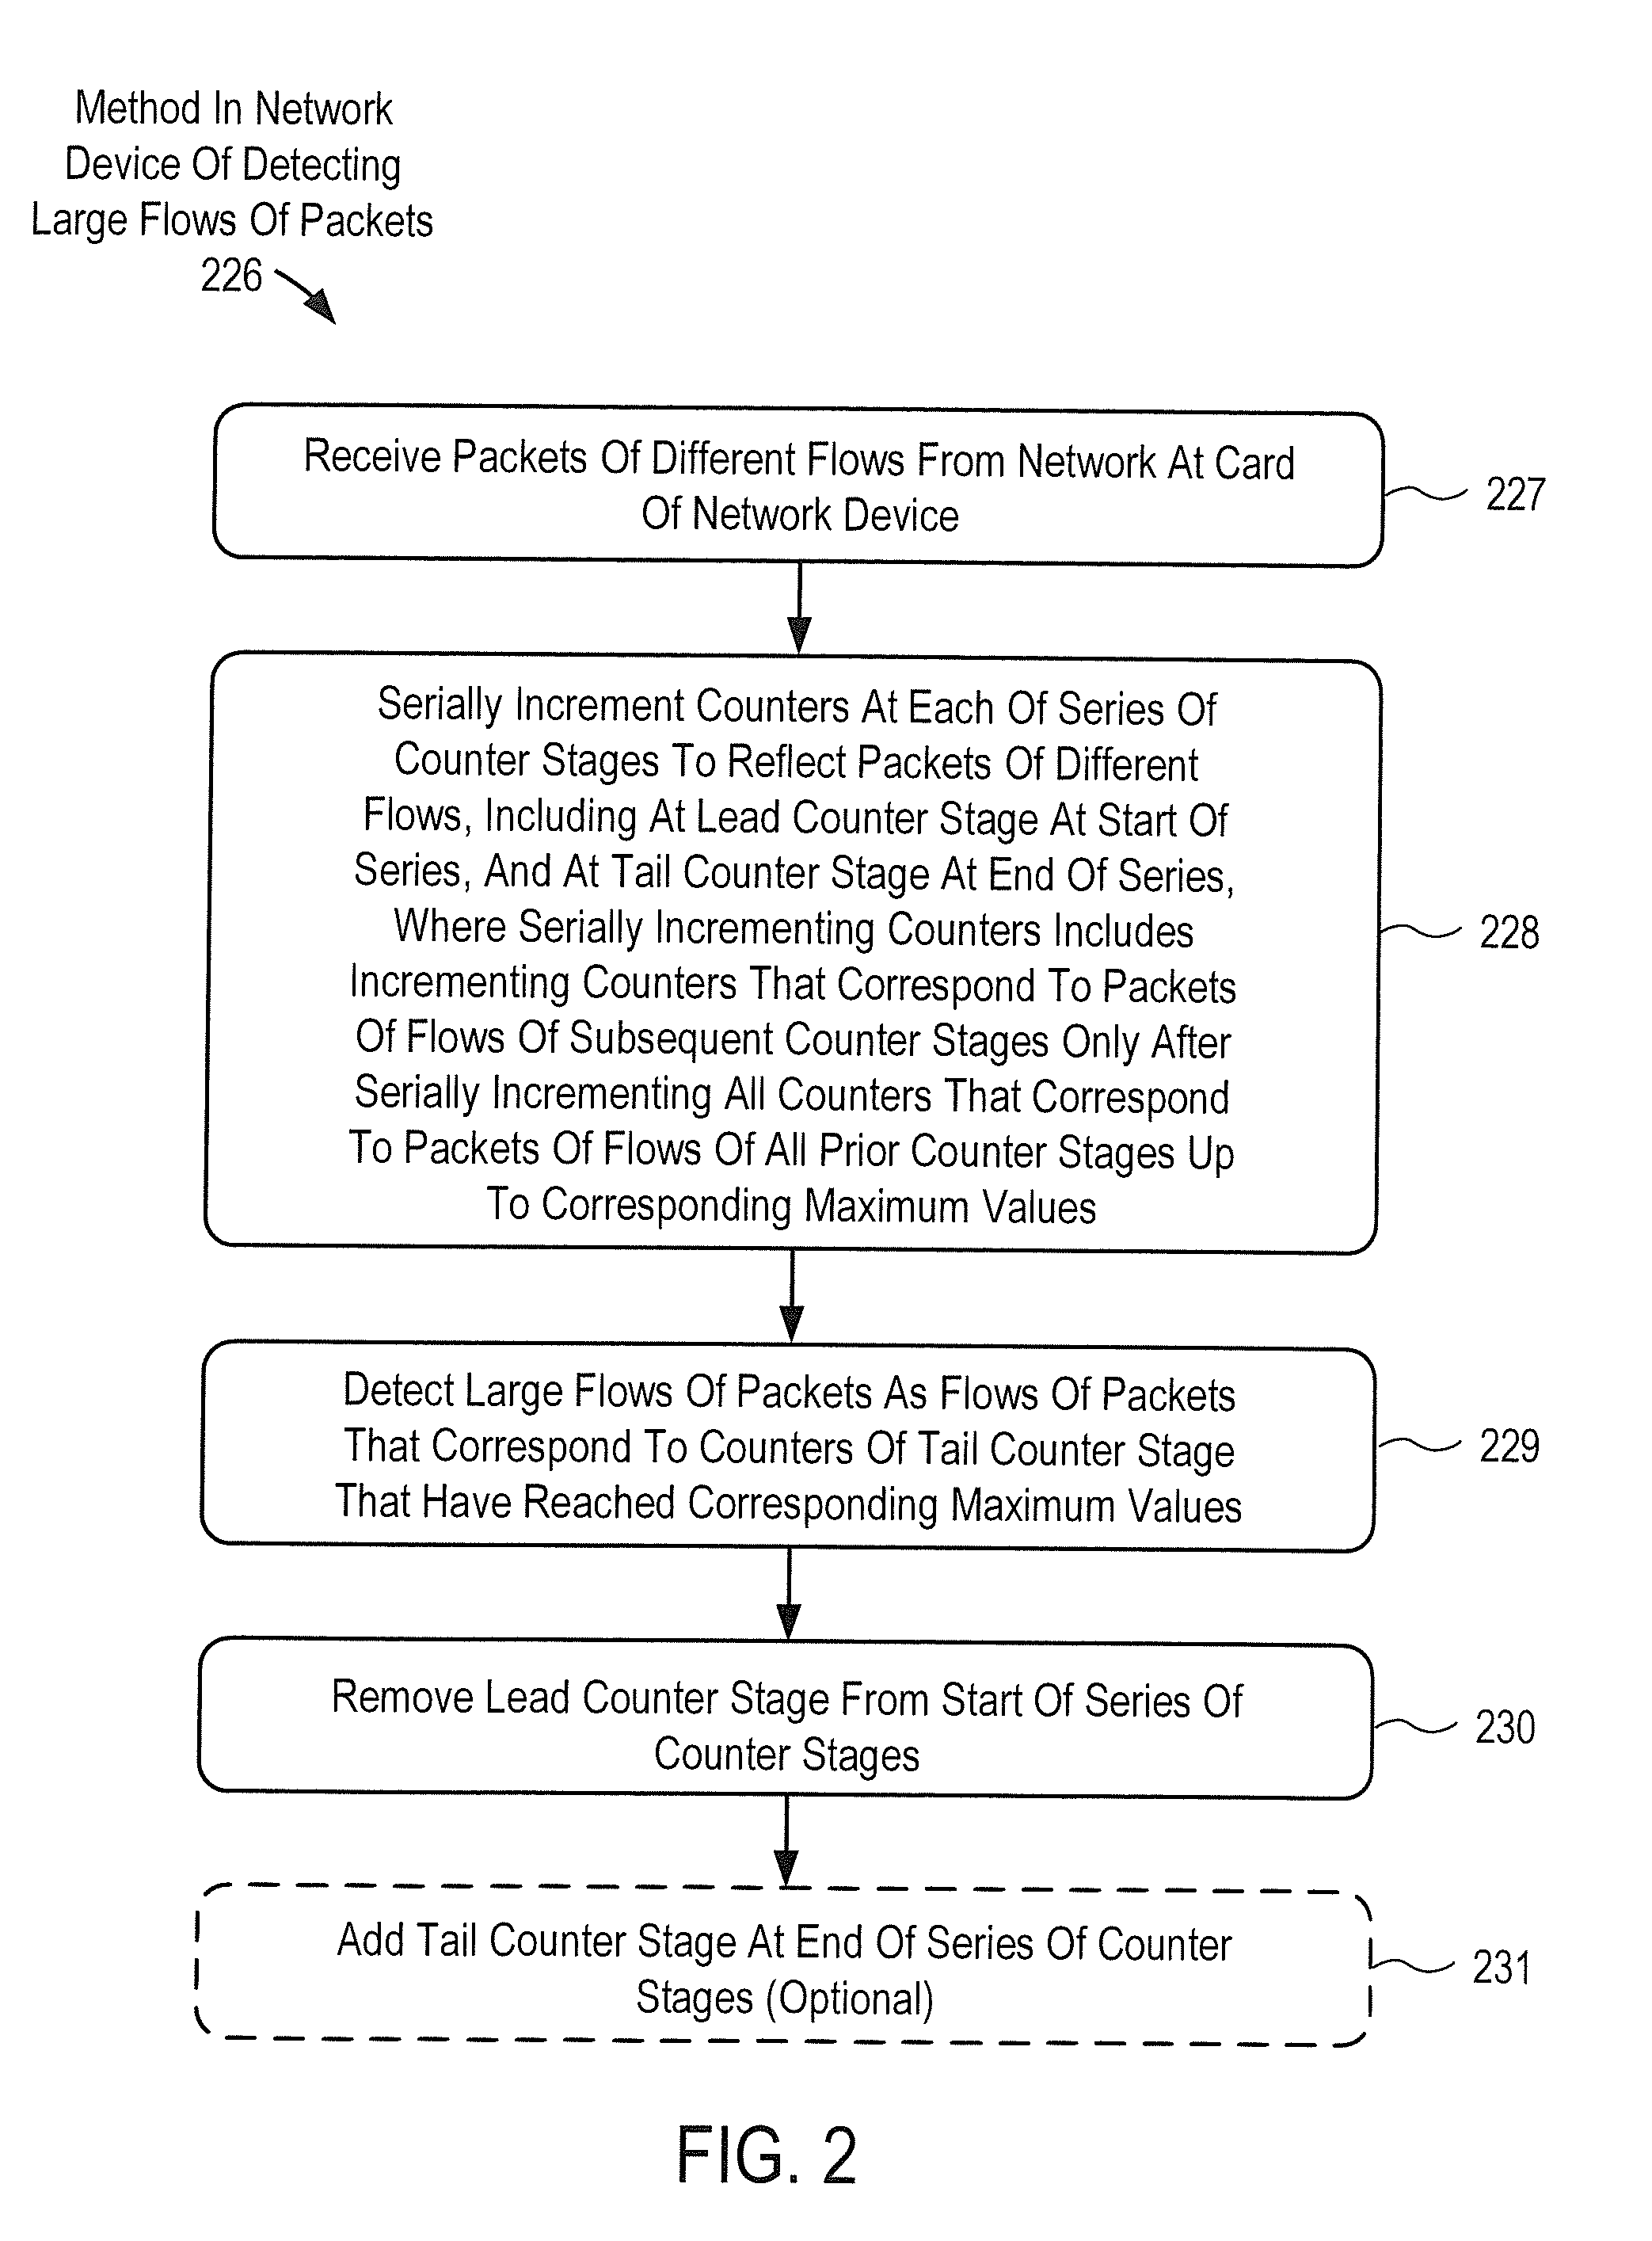 Removing lead filter from serial multiple-stage filter used to detect large flows in order to purge flows for prolonged operation